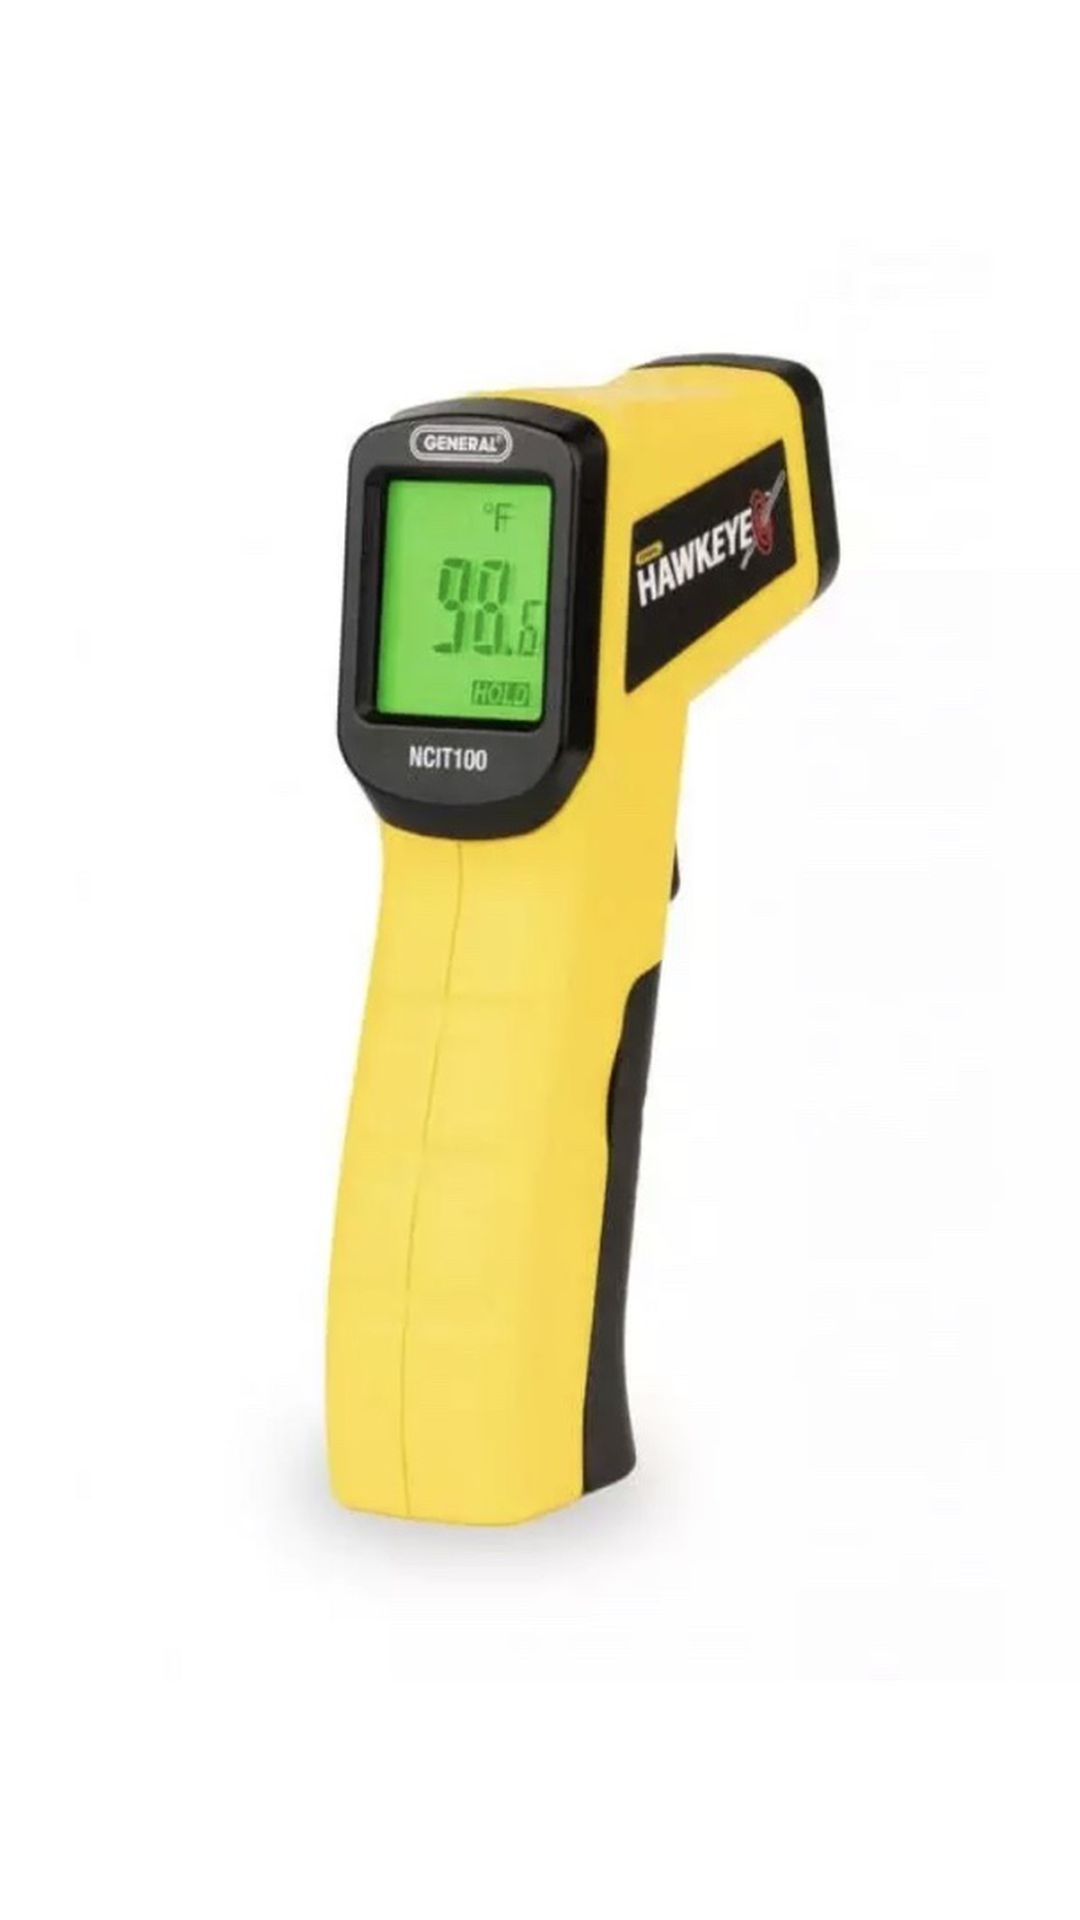 General Hawkeye No Contact LCD Infrared Thermometer NCIT100 Fast Quick Reading